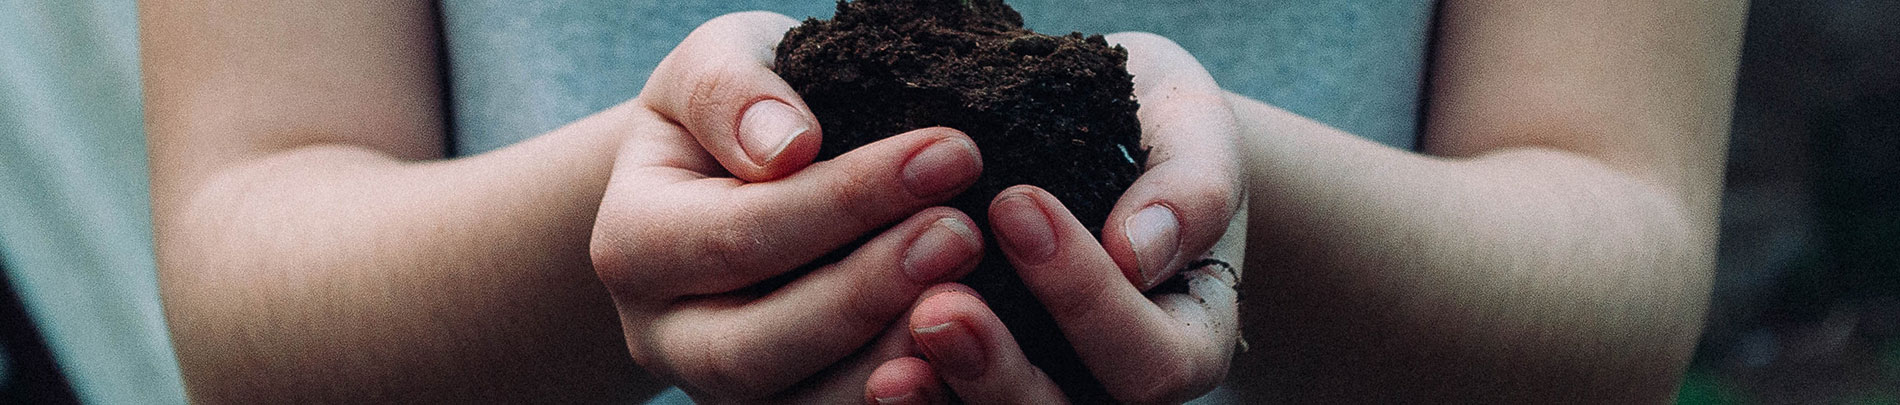 A person holding composted soil in their hands.